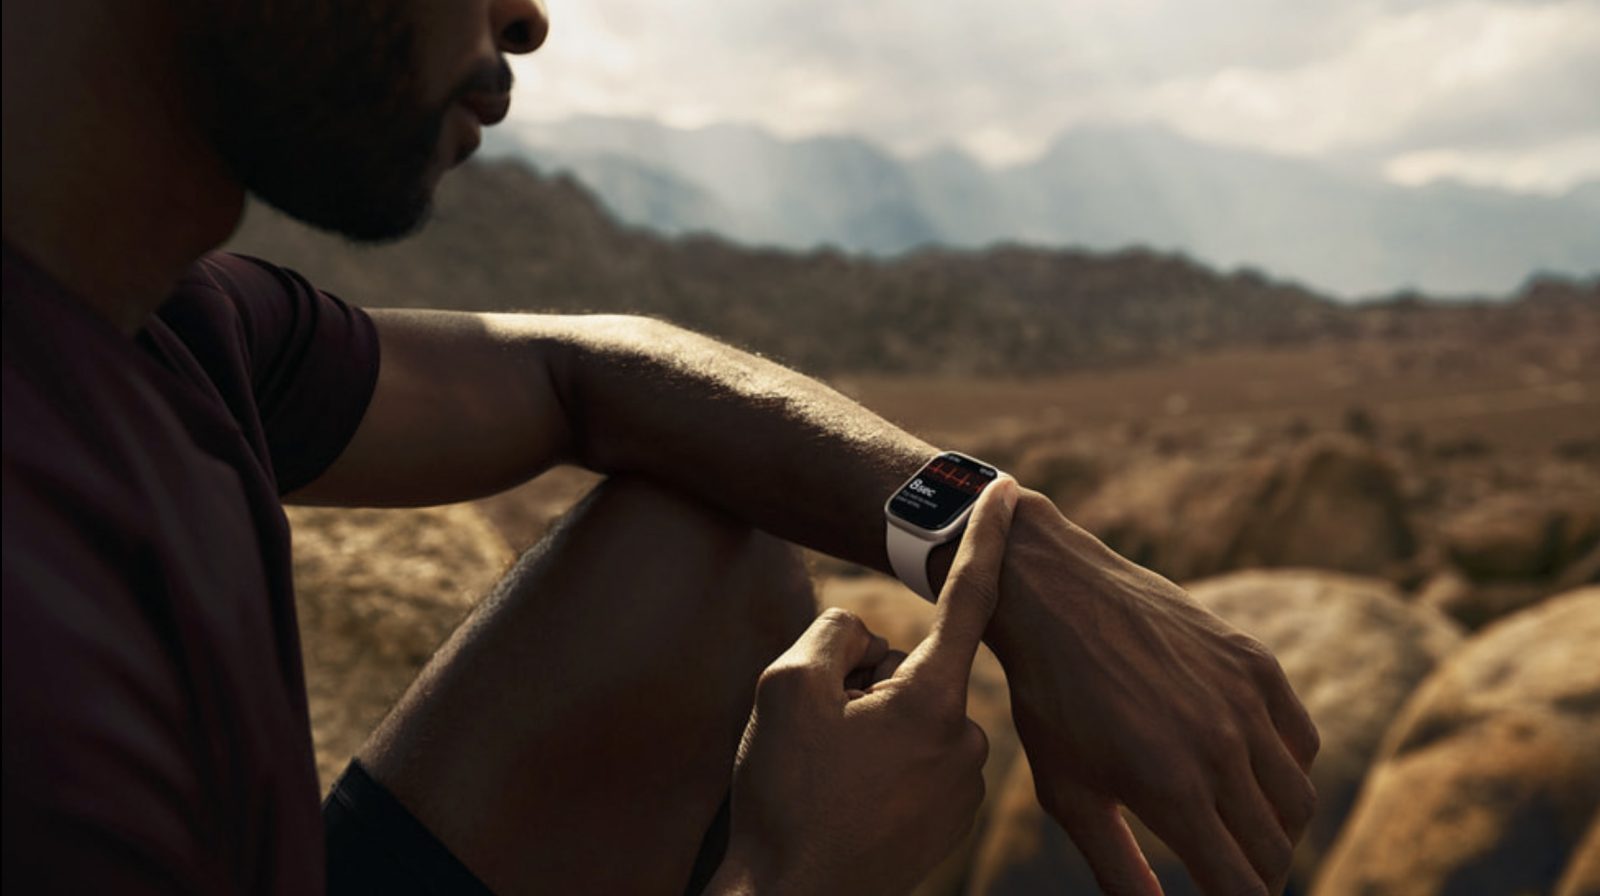 Apple Watch users can now access 1Password 8 